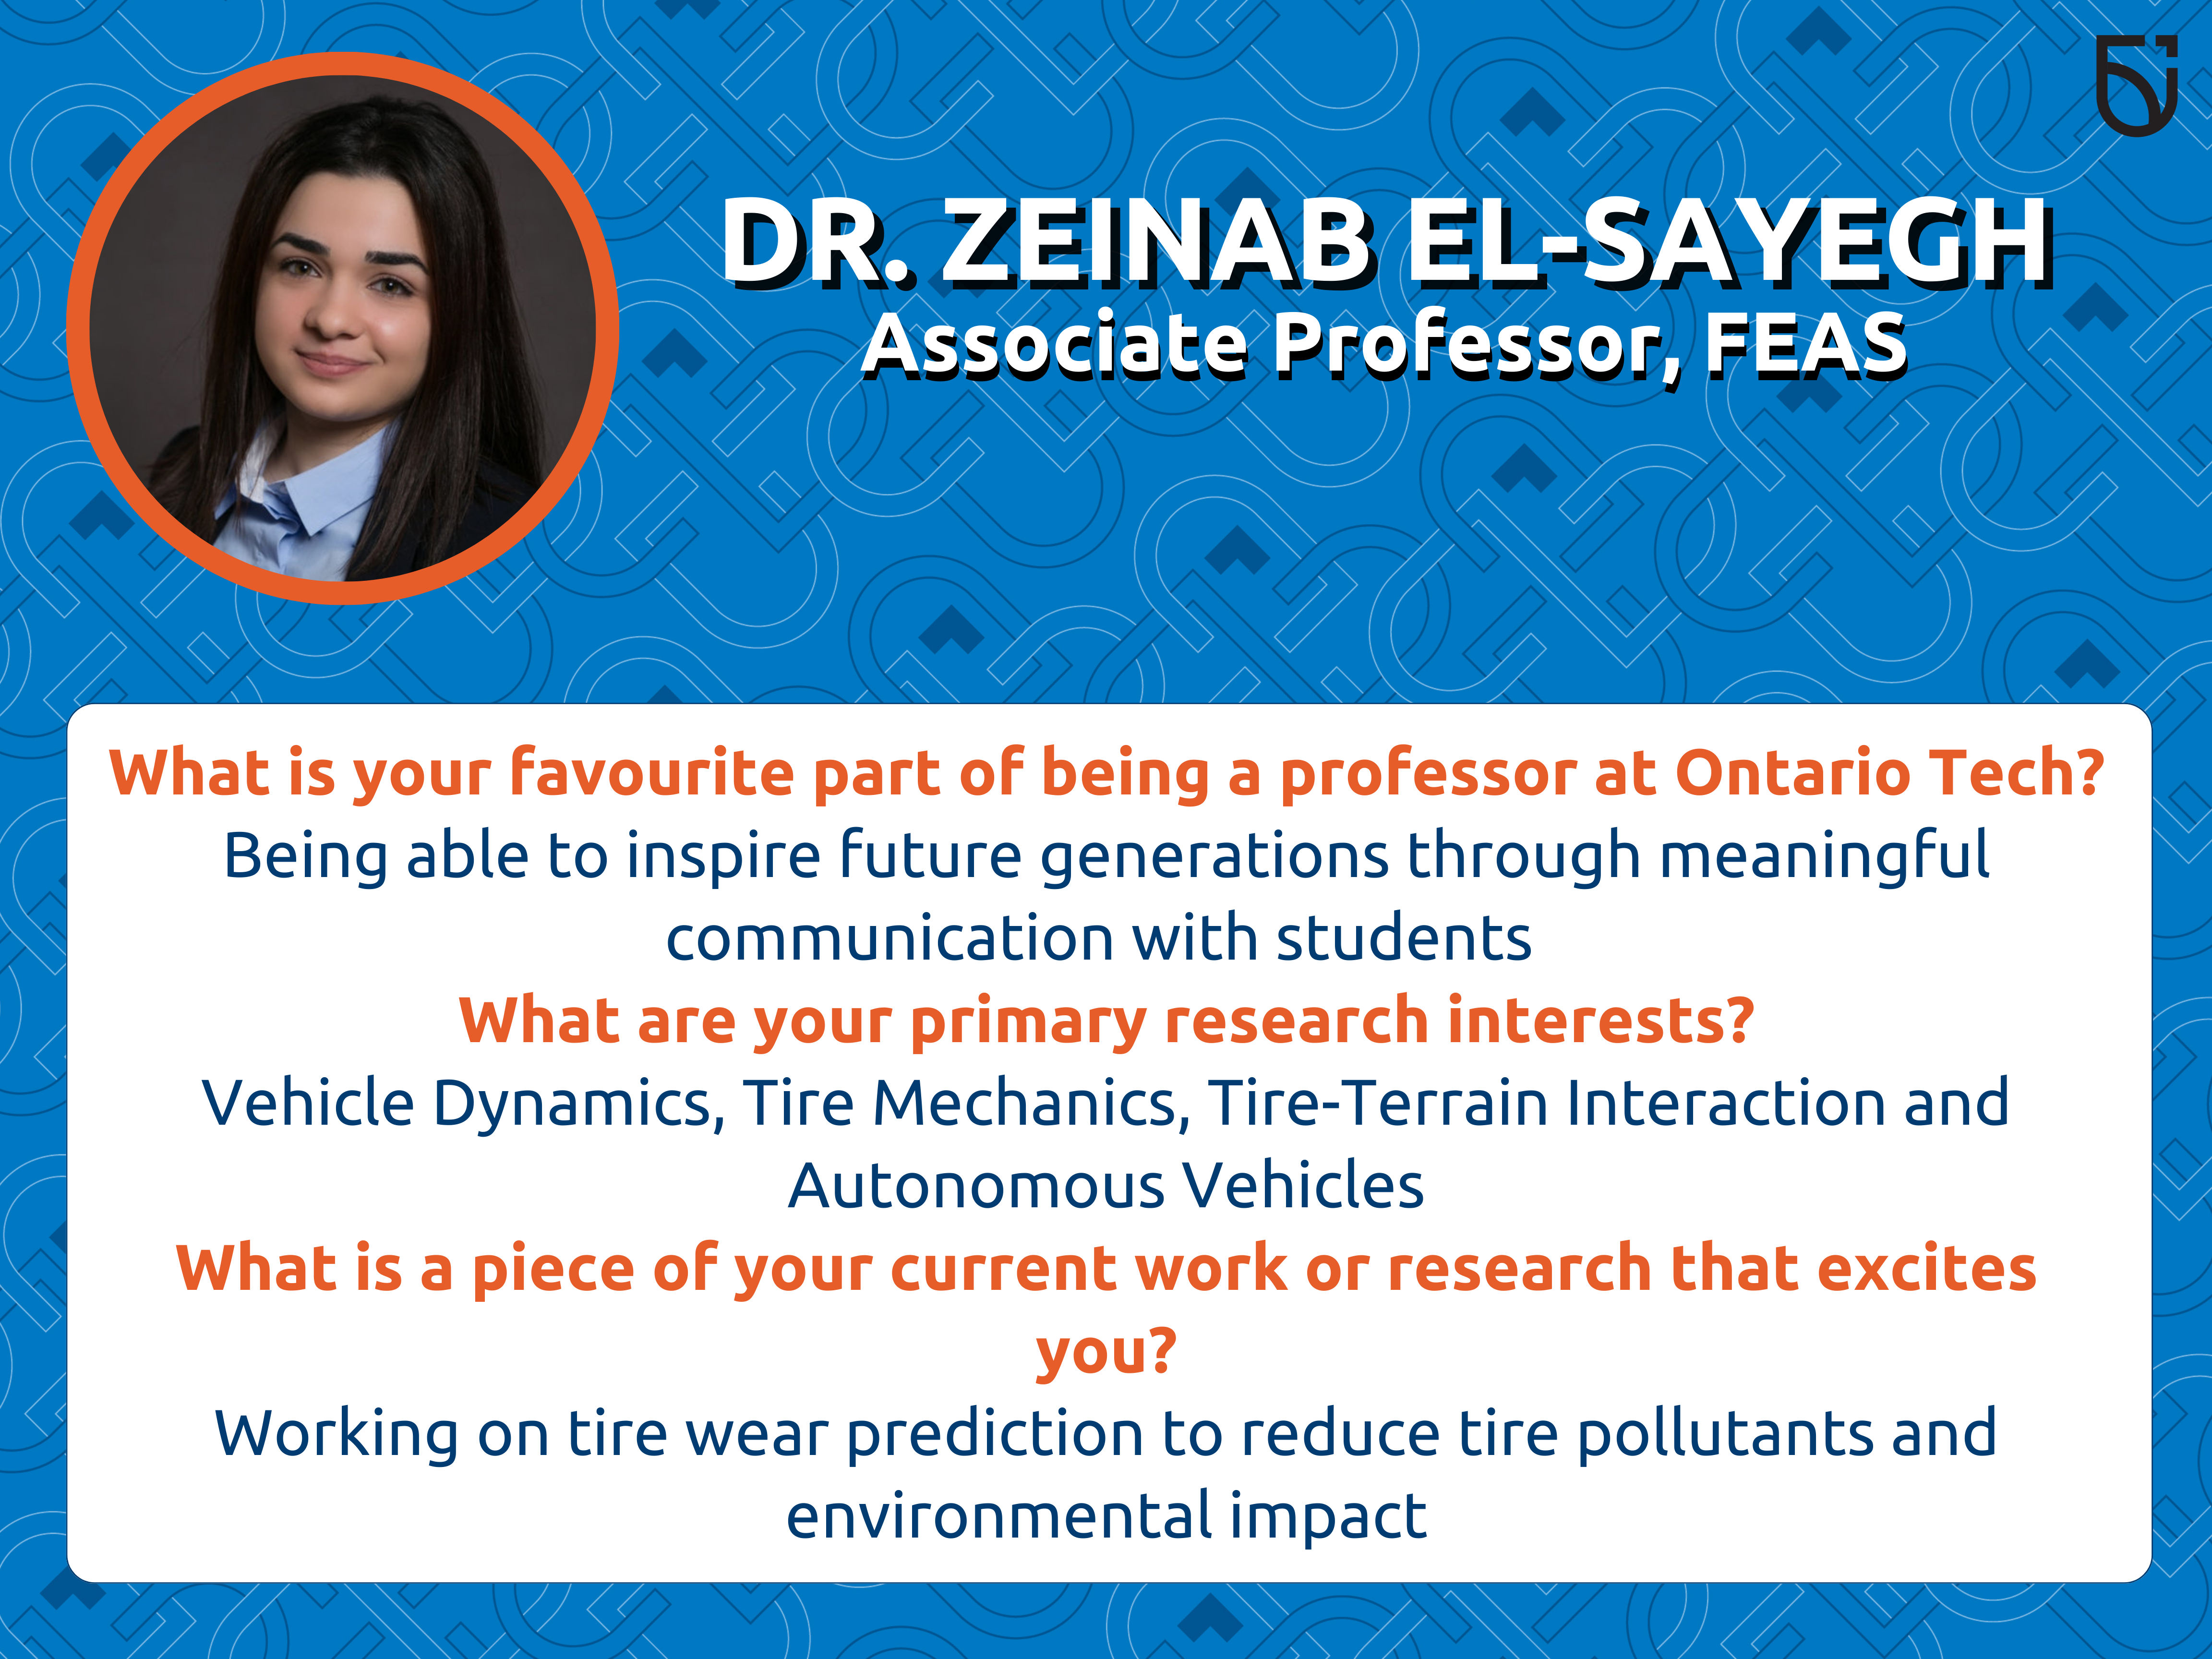 This photo is a Women’s Wednesday feature of Dr. El-Sayegh, an Associate Professor in the Faculty of Engineering and Applied Science